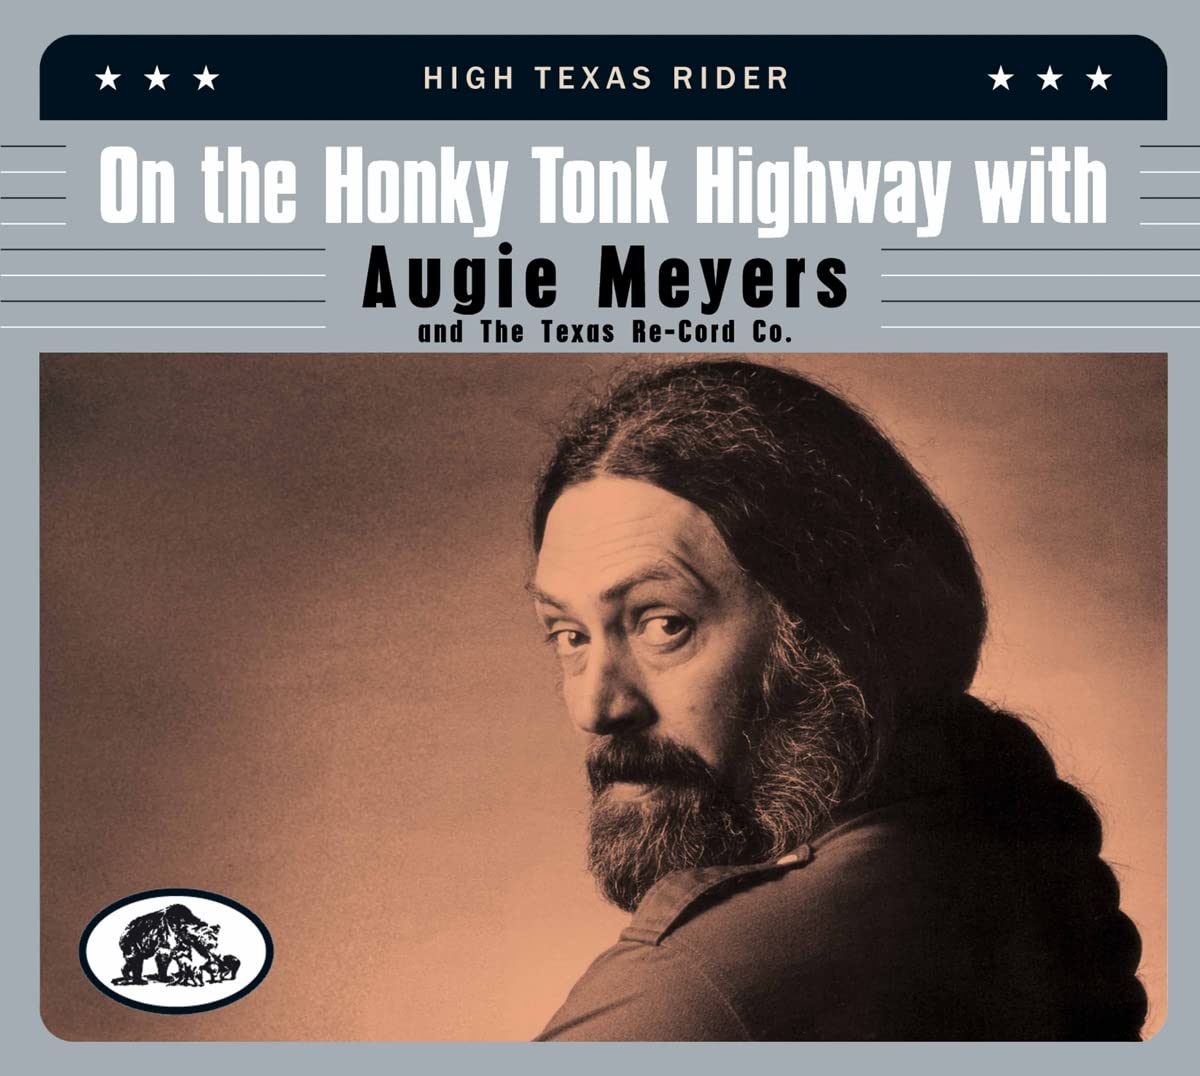 High Texas Rider - On the Honky Tonk Highway with Augie Meyers & the Texas Re-Cord Co.